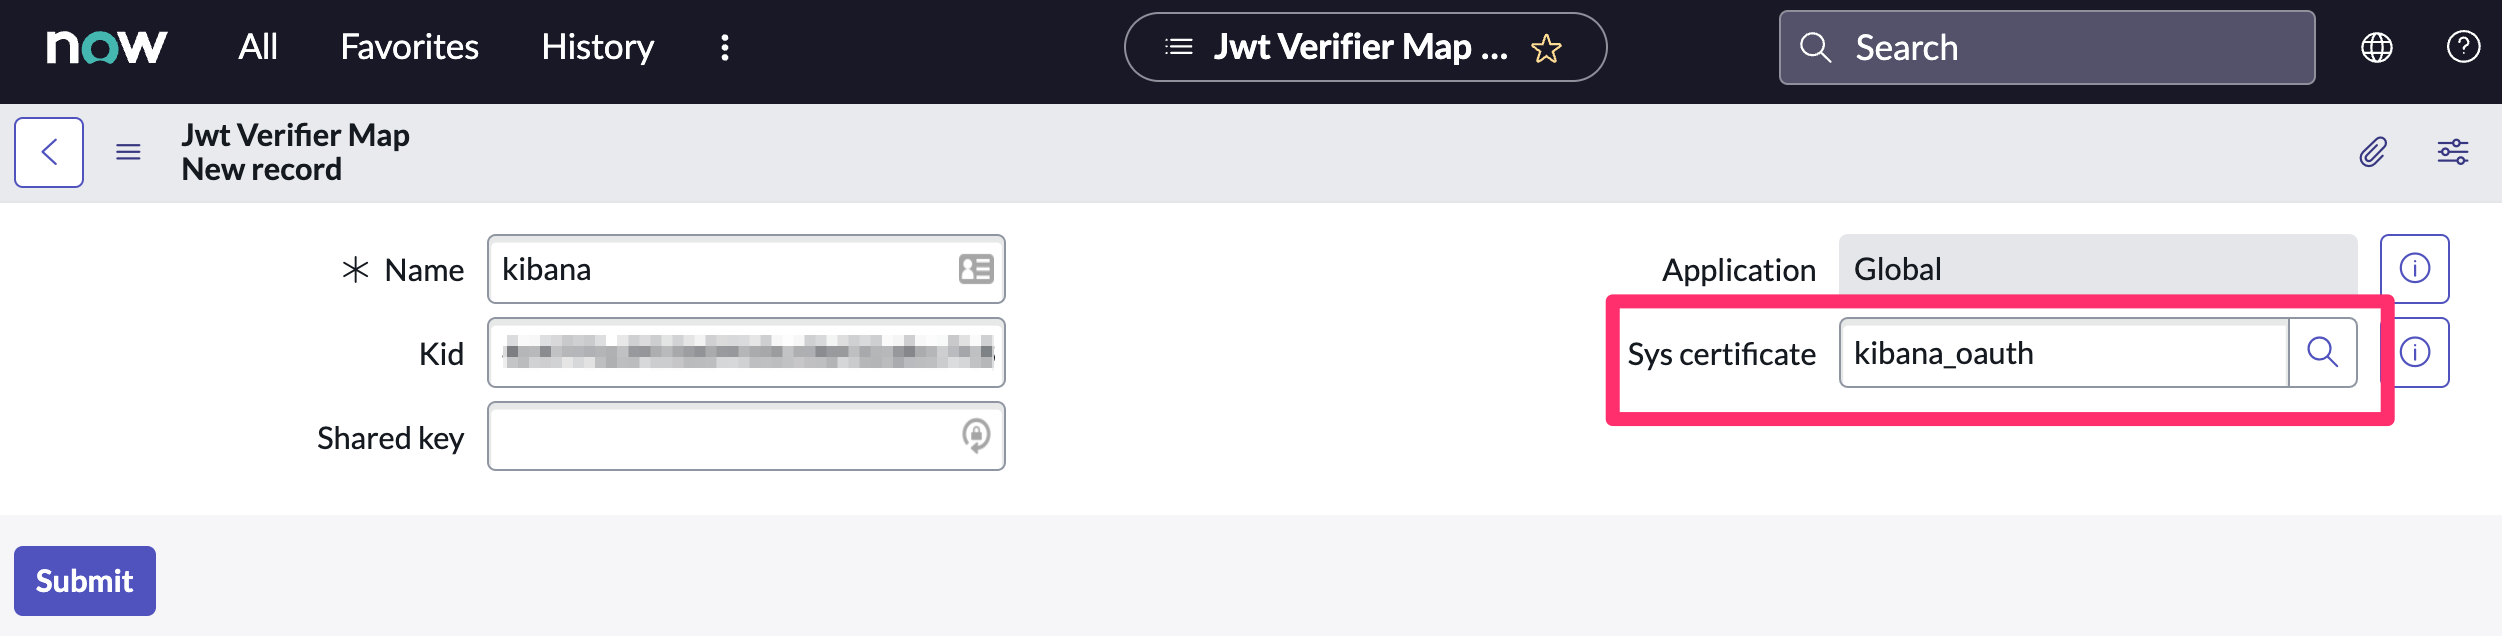 Shows new JWT Verifier Map form in ServiceNow